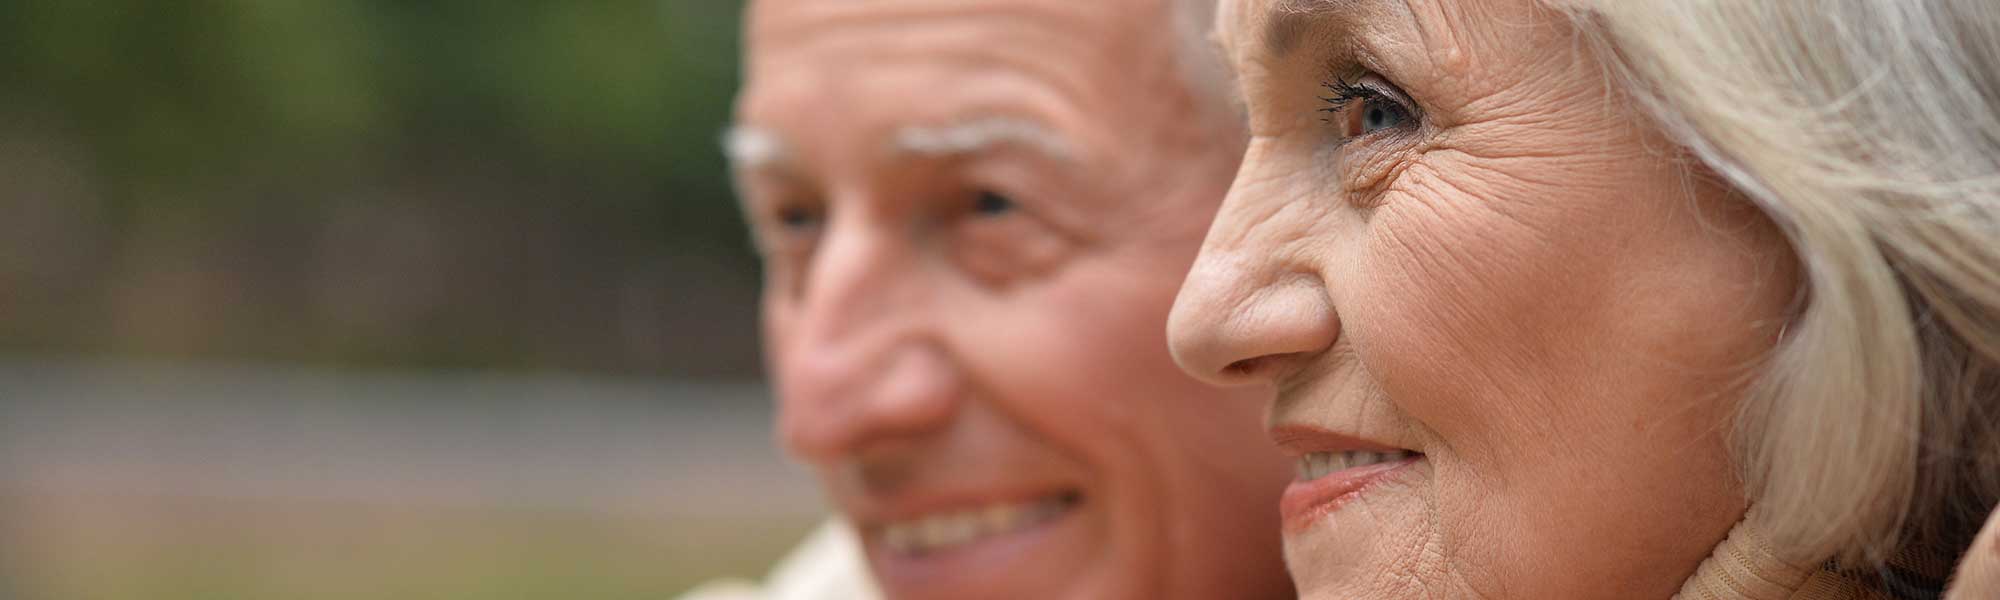 A close-up photo of two elderly people